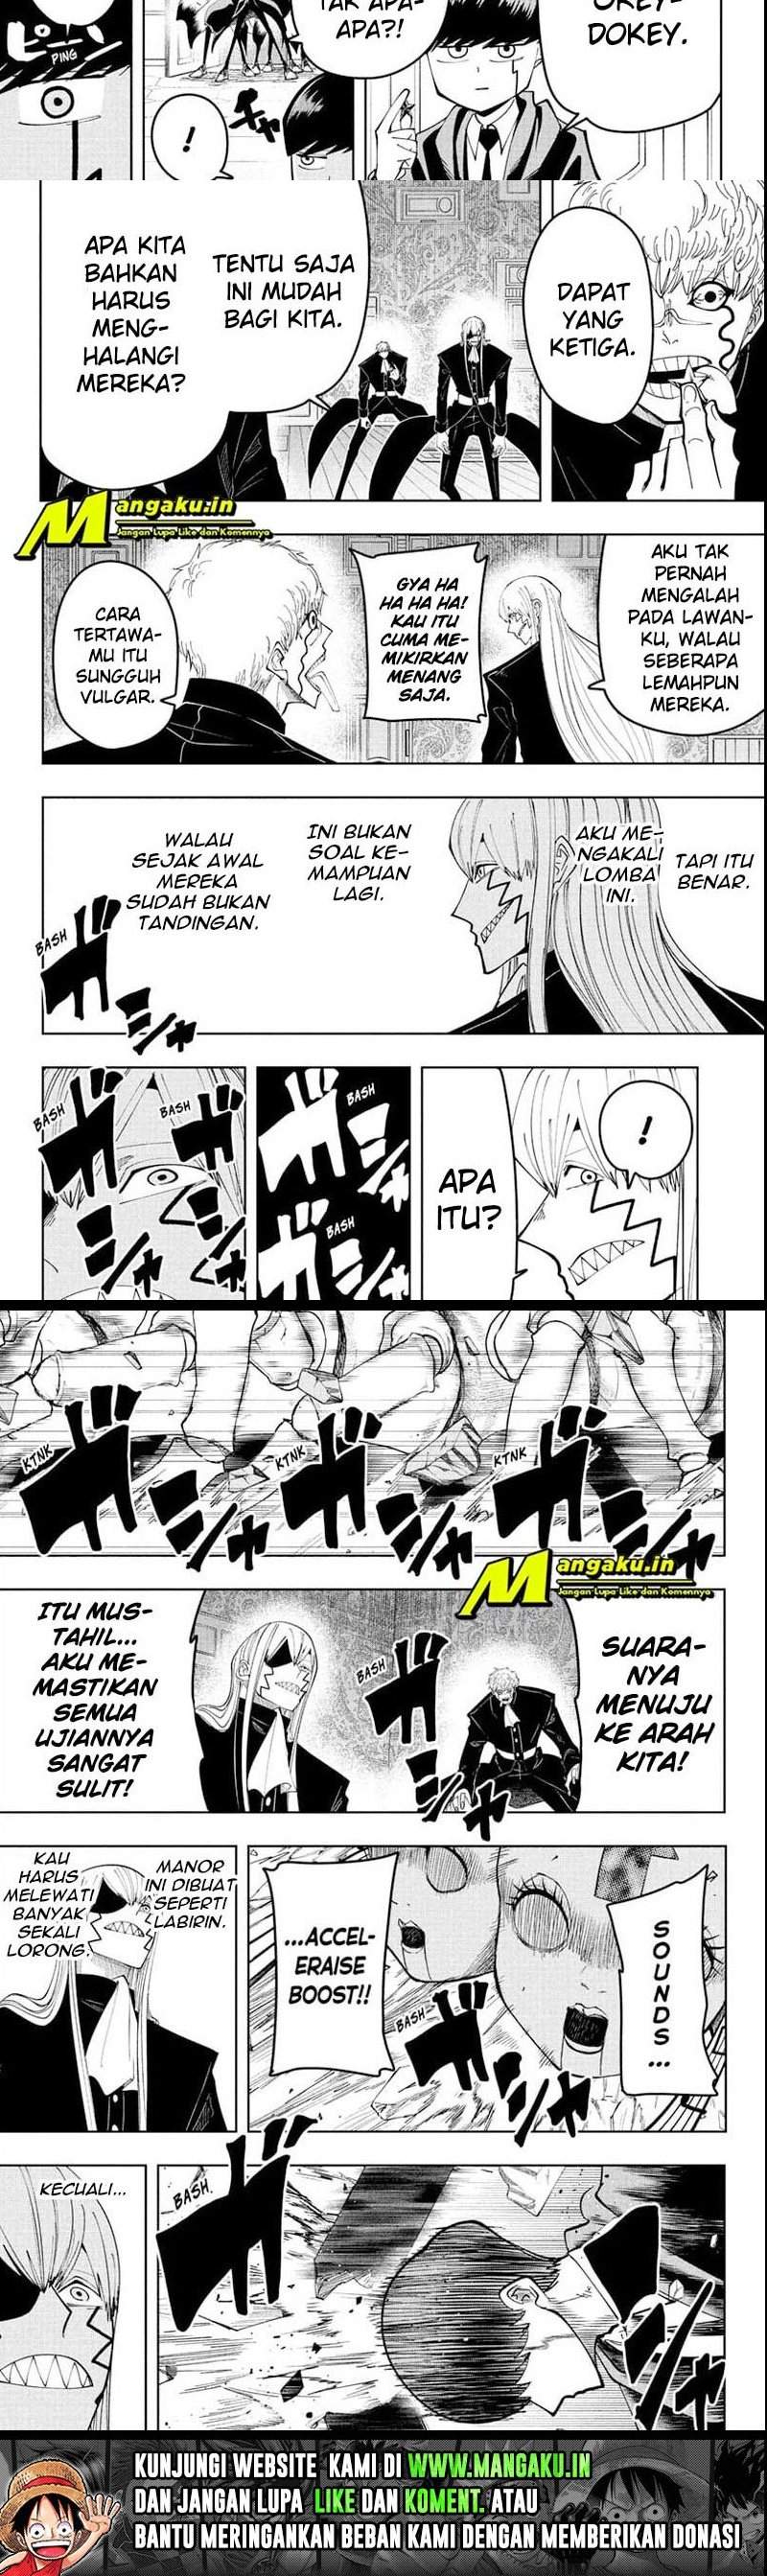 Mashle: Magic and Muscles Chapter 83